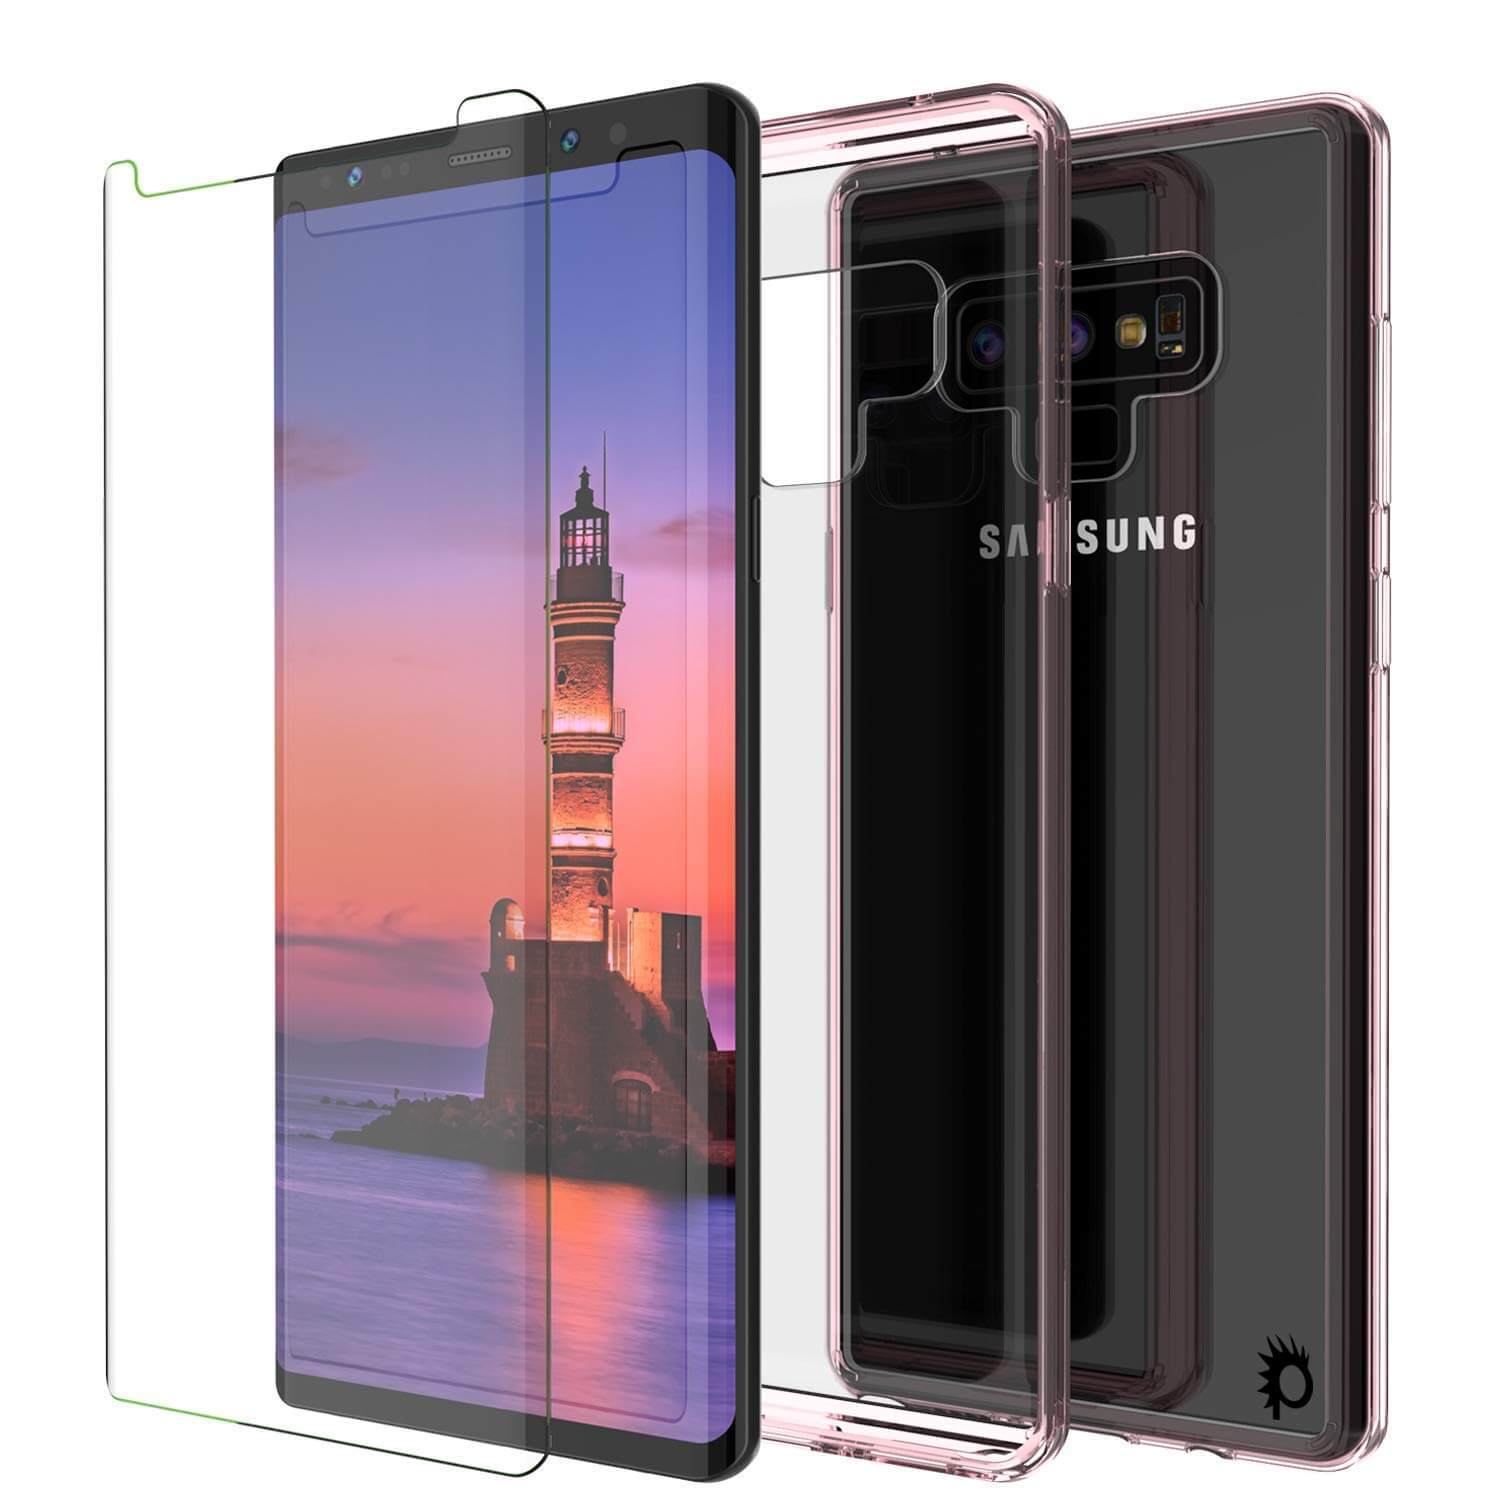 Galaxy Note 9 Case, Punkcase Lucid-2.0 Series Slim Fit Armor Crystal Pink Cover